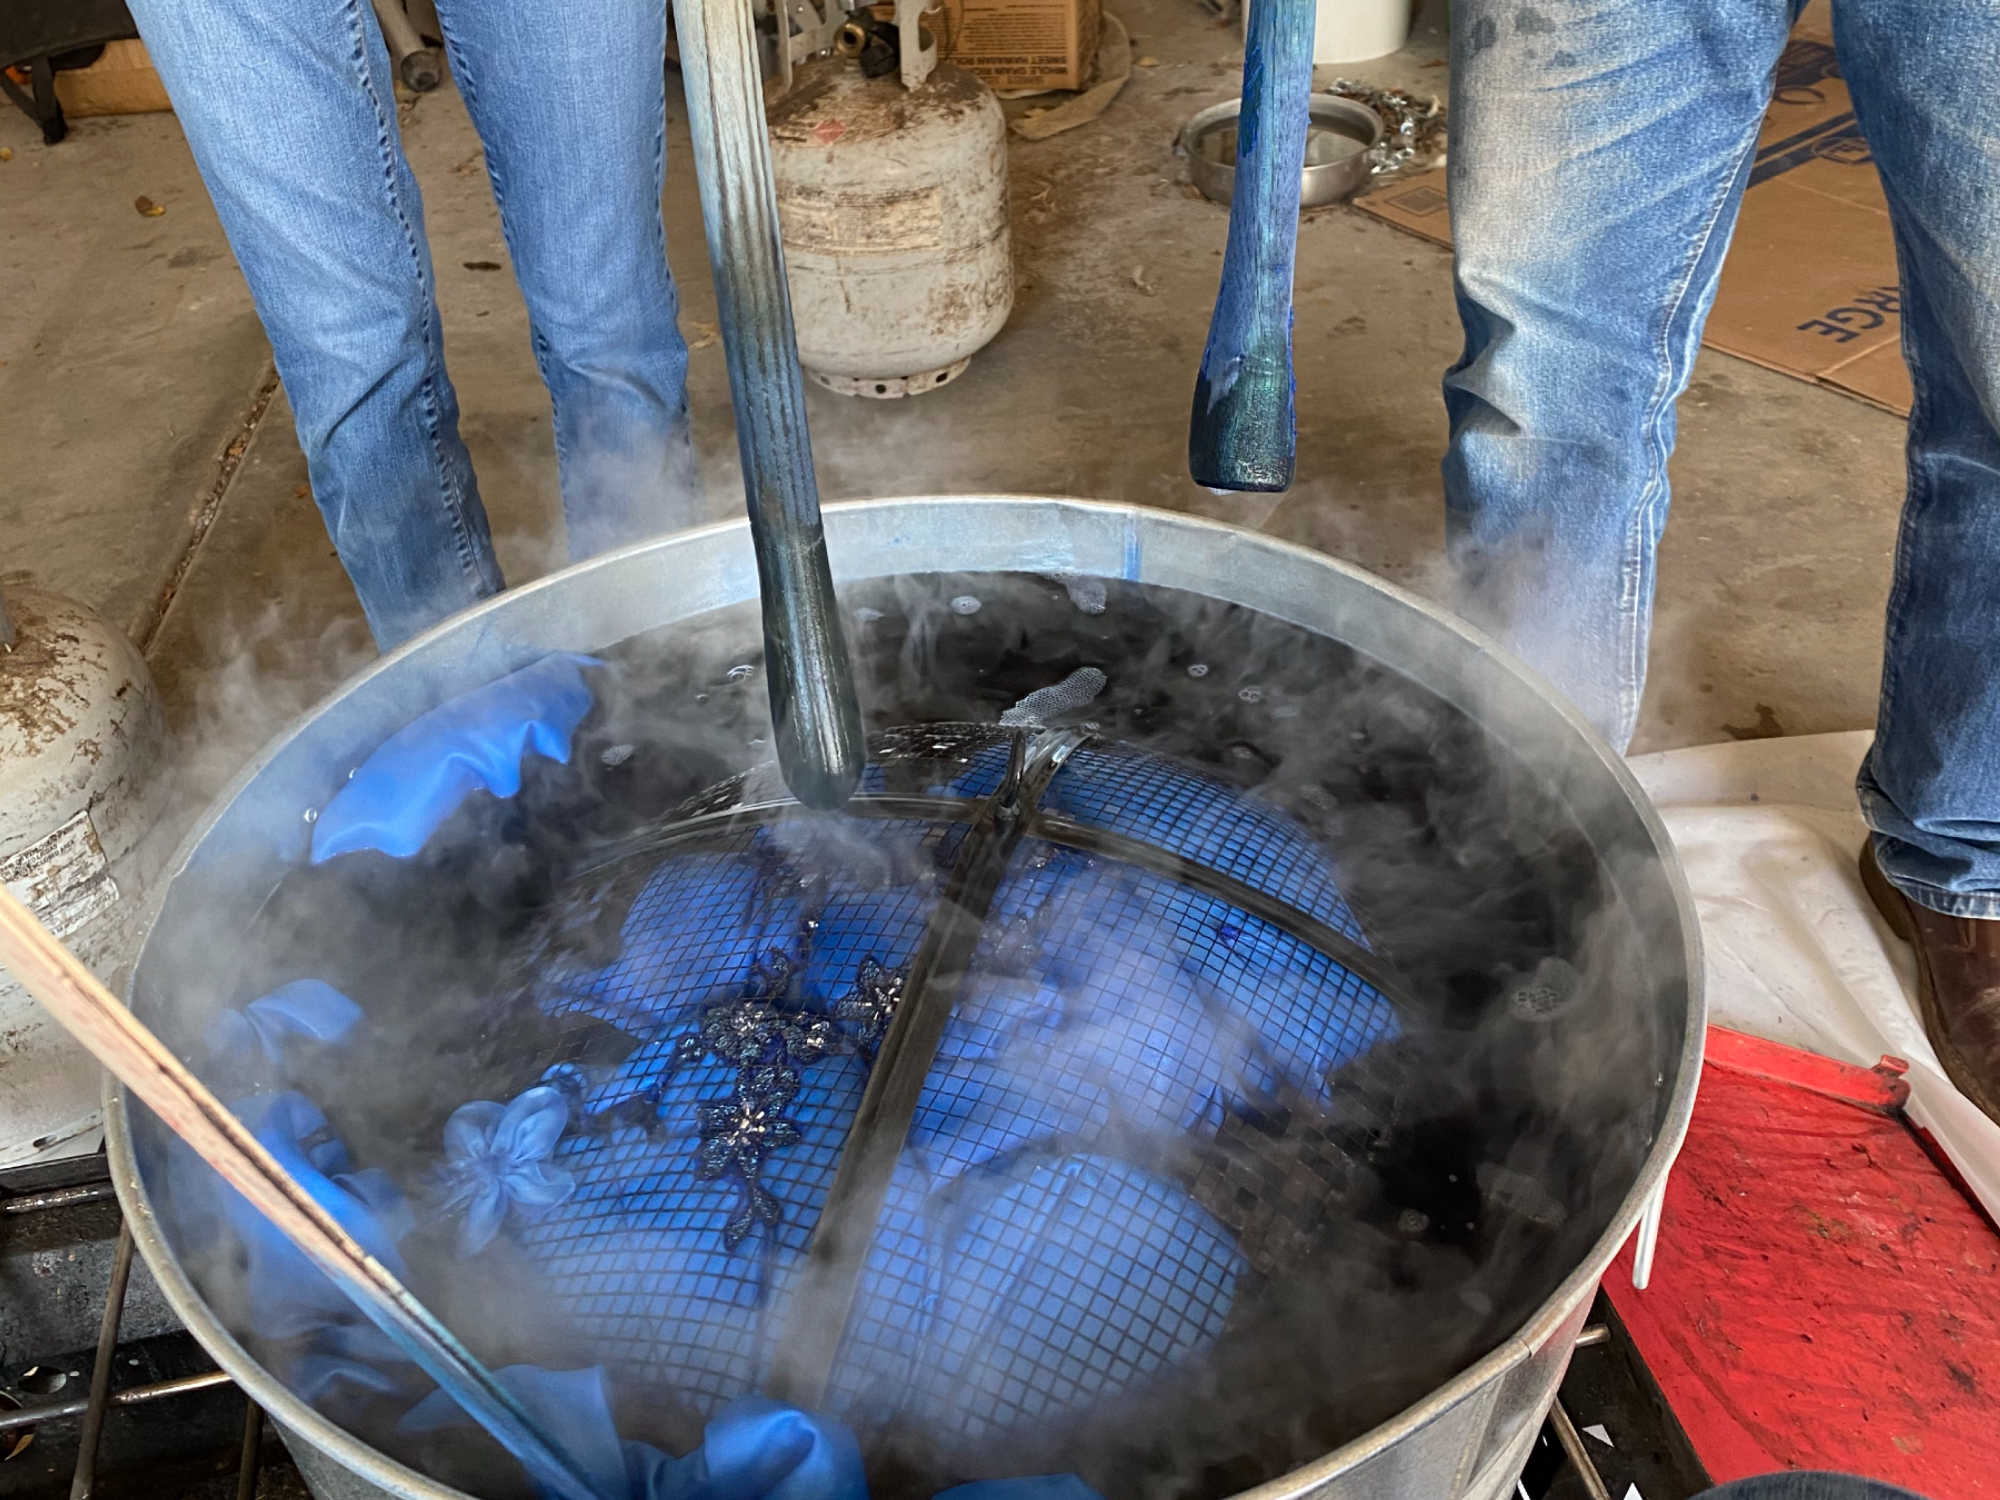 A secondhand wedding dress being dyed blue in a metal tub. Several people use yardsticks and a fire pit cover to hold the dress underwater.